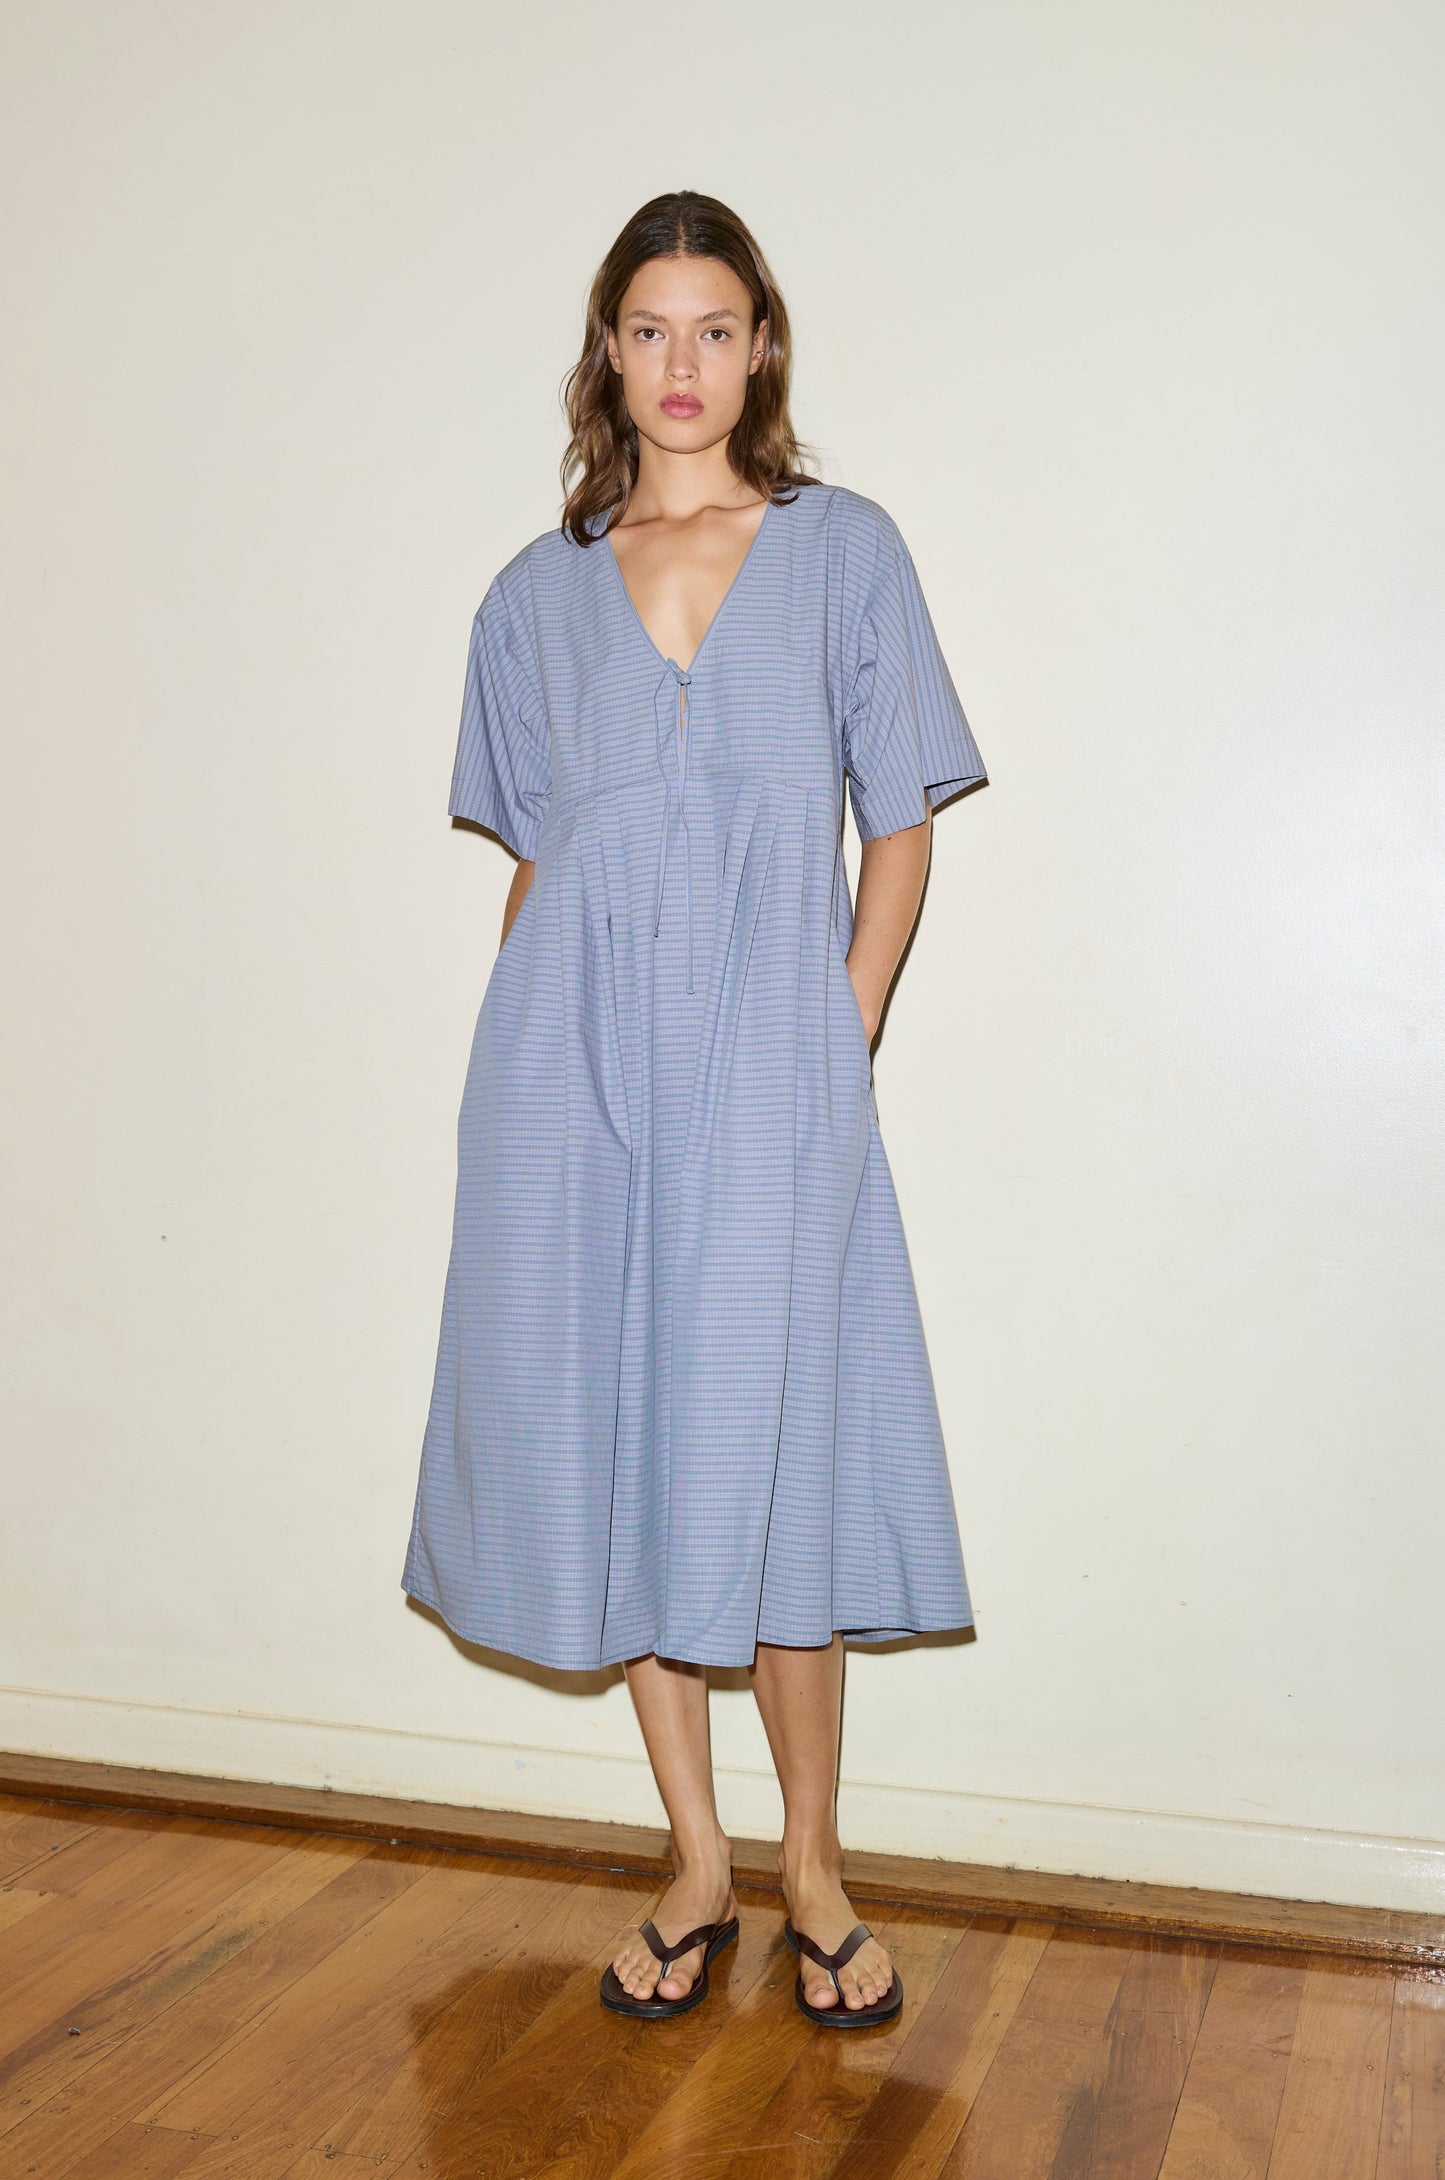 The Square Sleeve Dress - Pillow Check